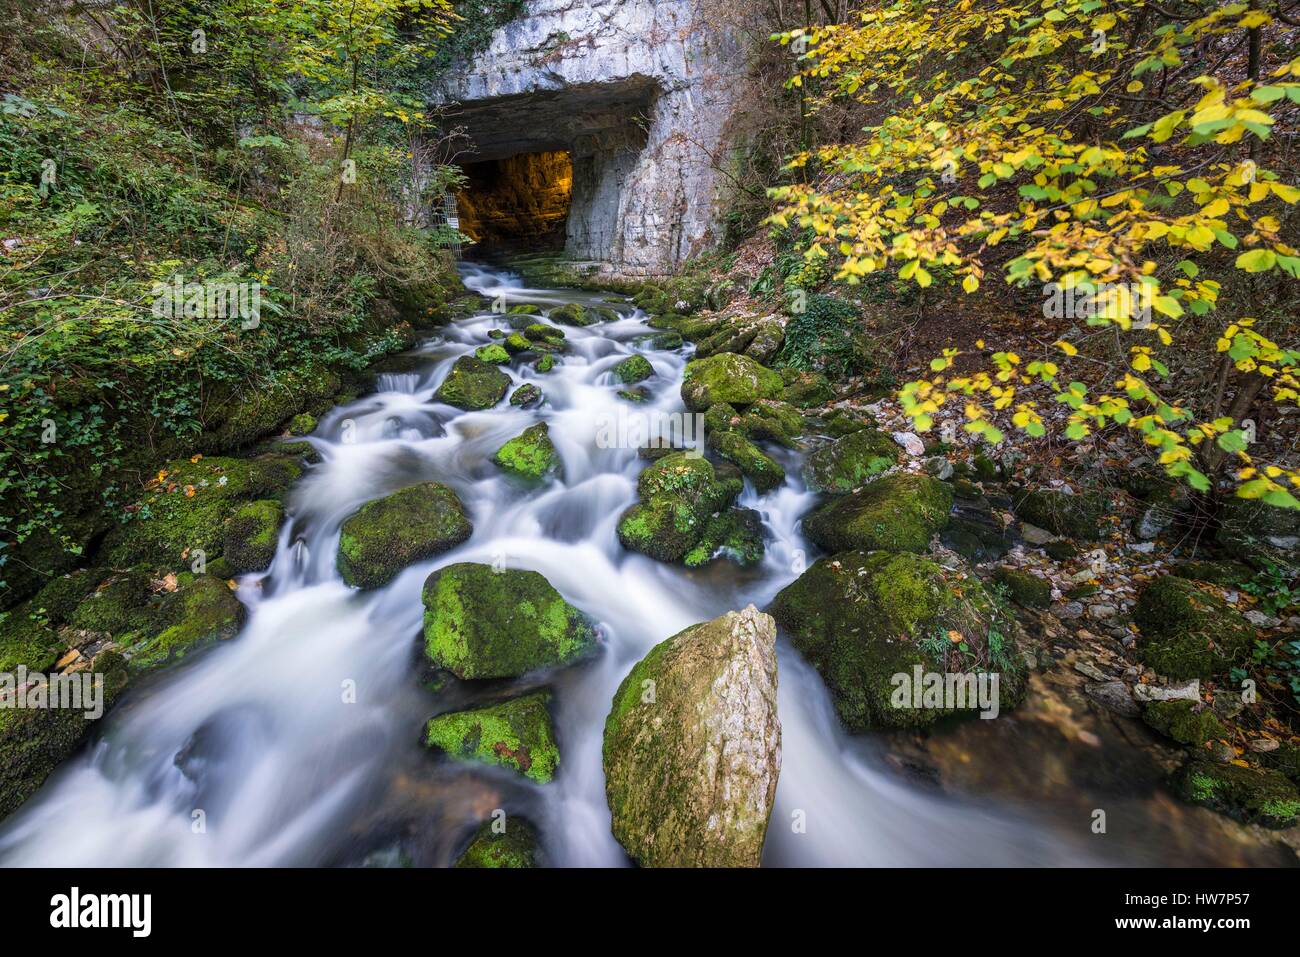 France, Isere, Sassenage, Furon river at the exit of Sassenage Tanks or Sassenage caves, at the foot of the Vercors massif Stock Photo